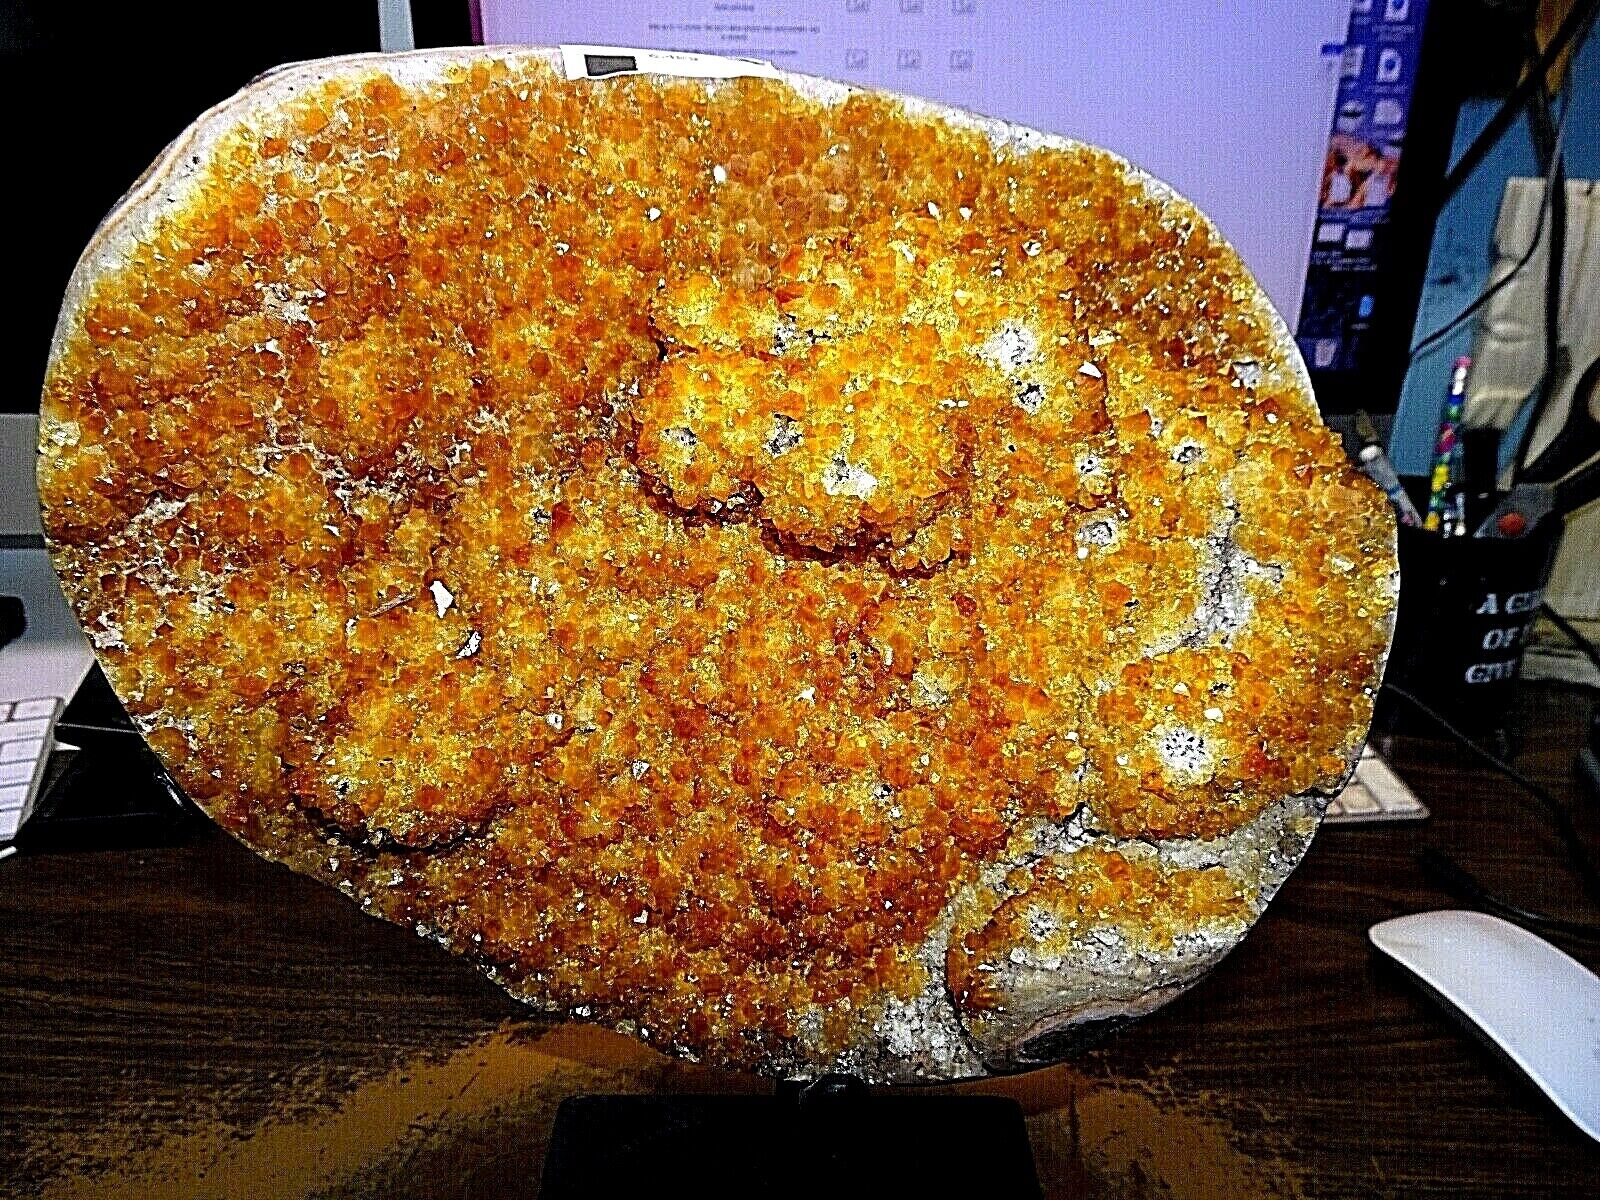 LG. POLISHED CITRINE CRYSTAL CLUSTER GEODE FROM BRAZIL CATHEDRAL W/ STEEL BASE 